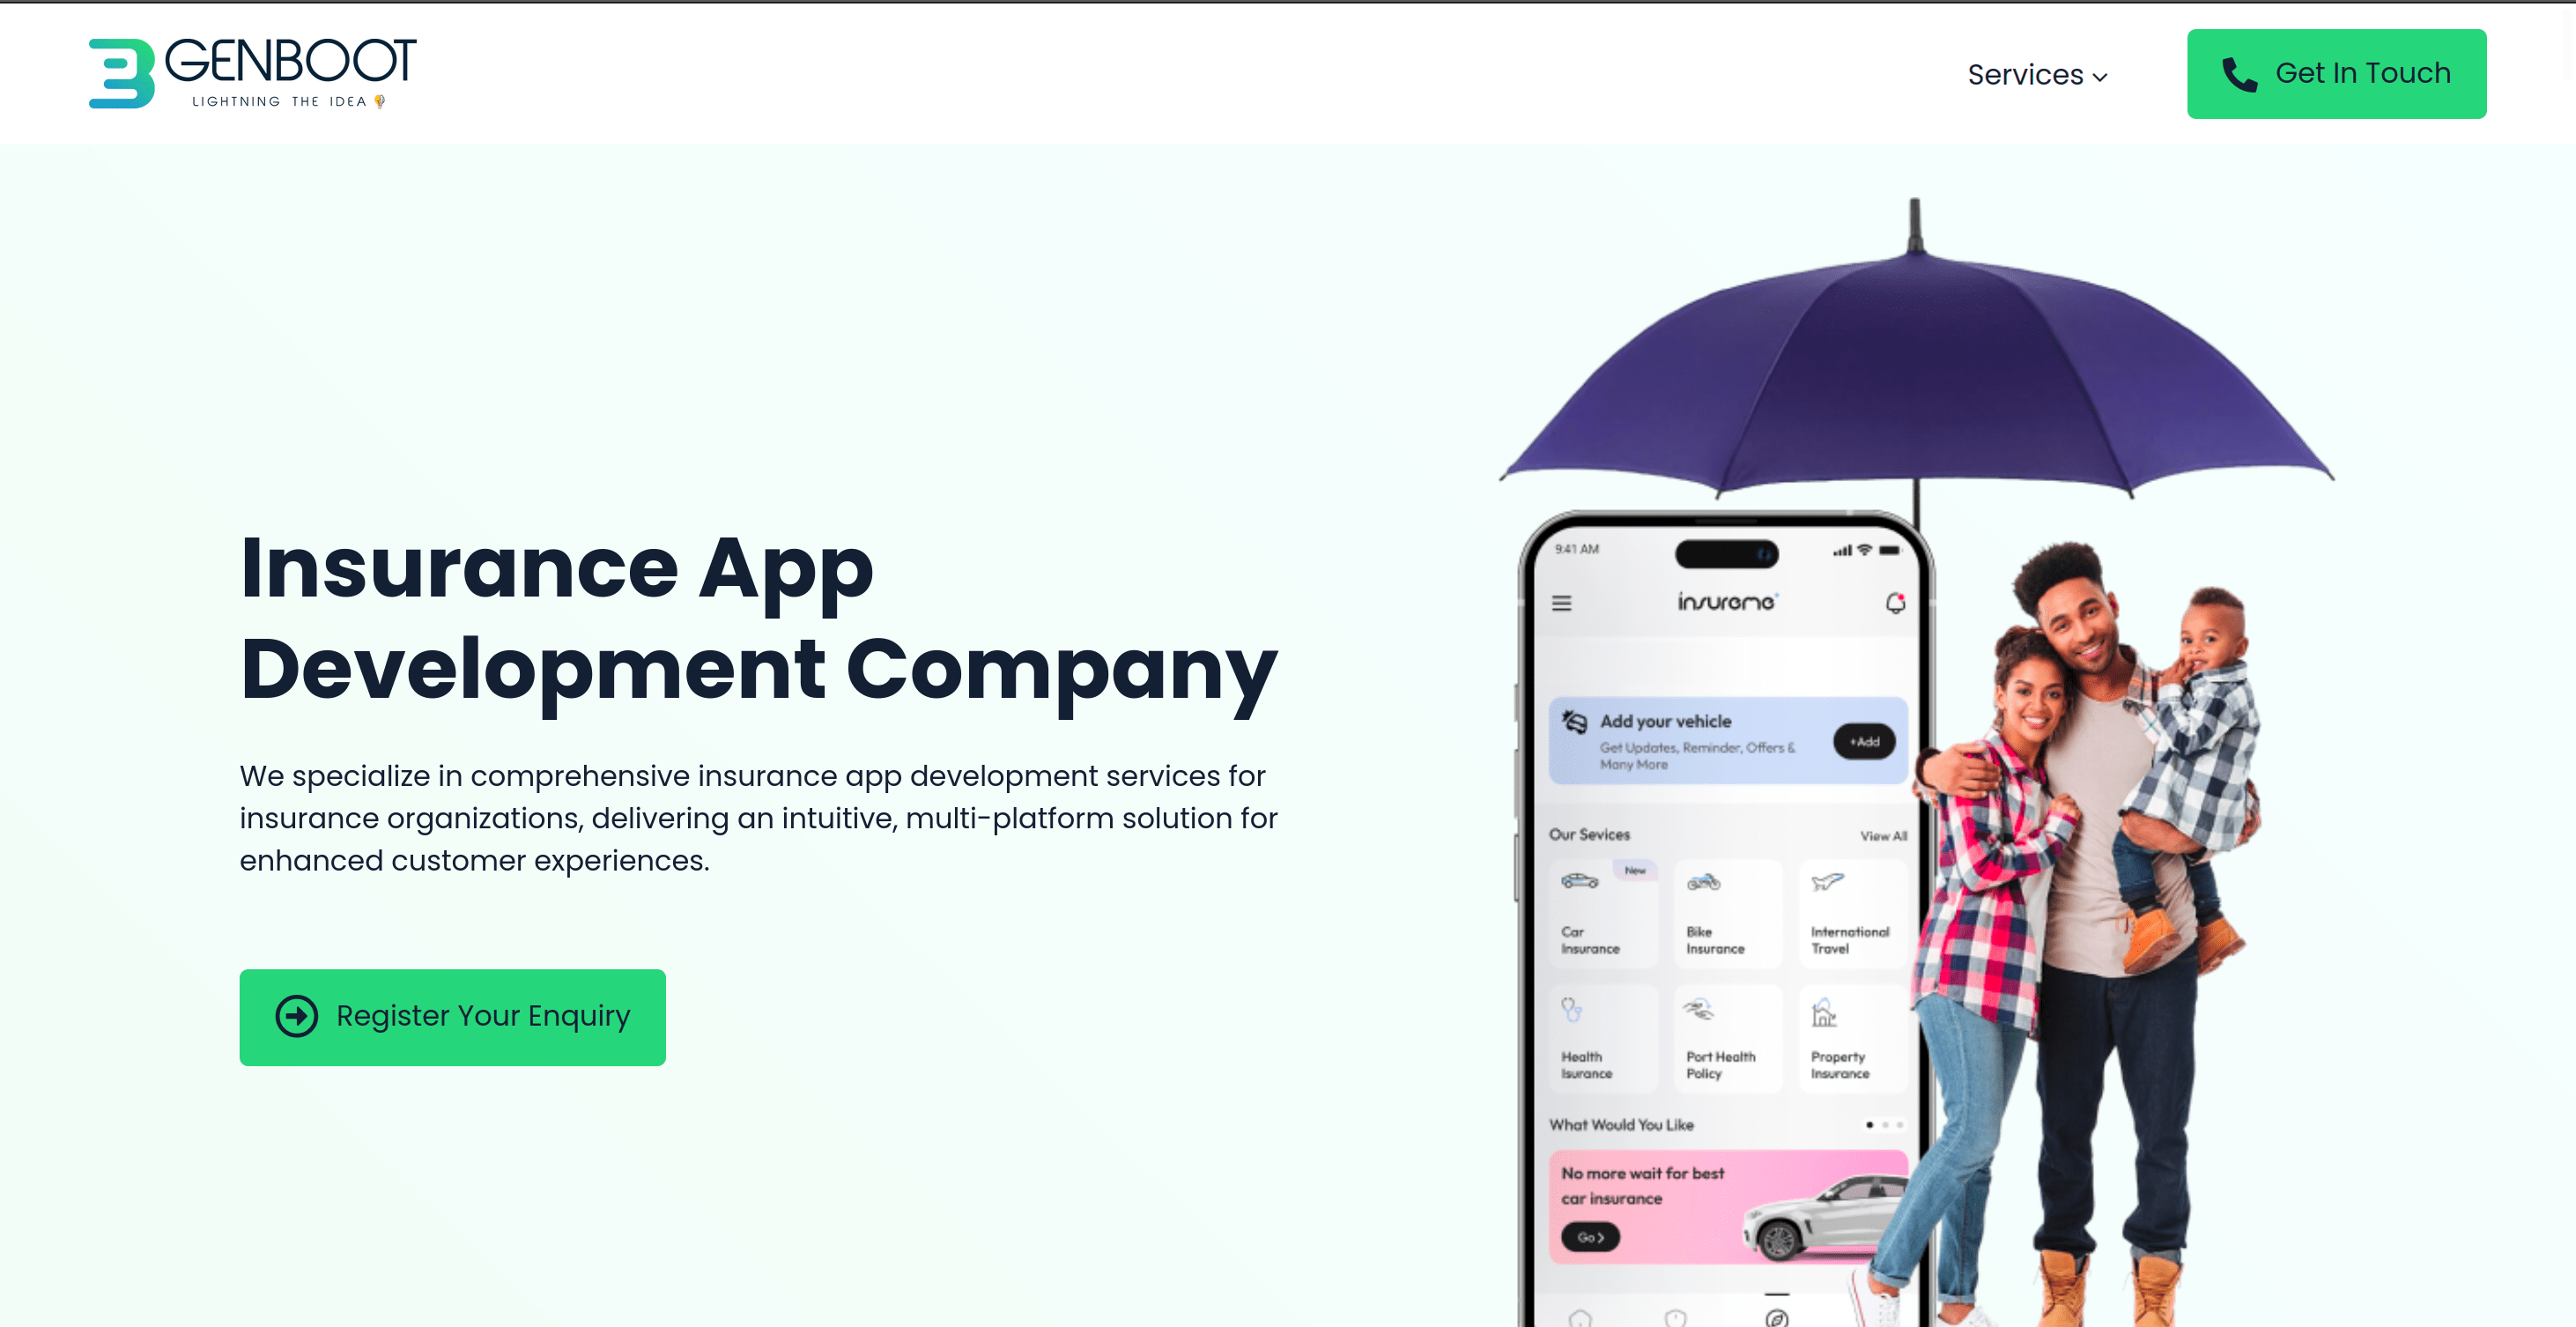  Boost Efficiency and Loyalty with Custom Mobile Insurance Apps - Chandigarh Computer